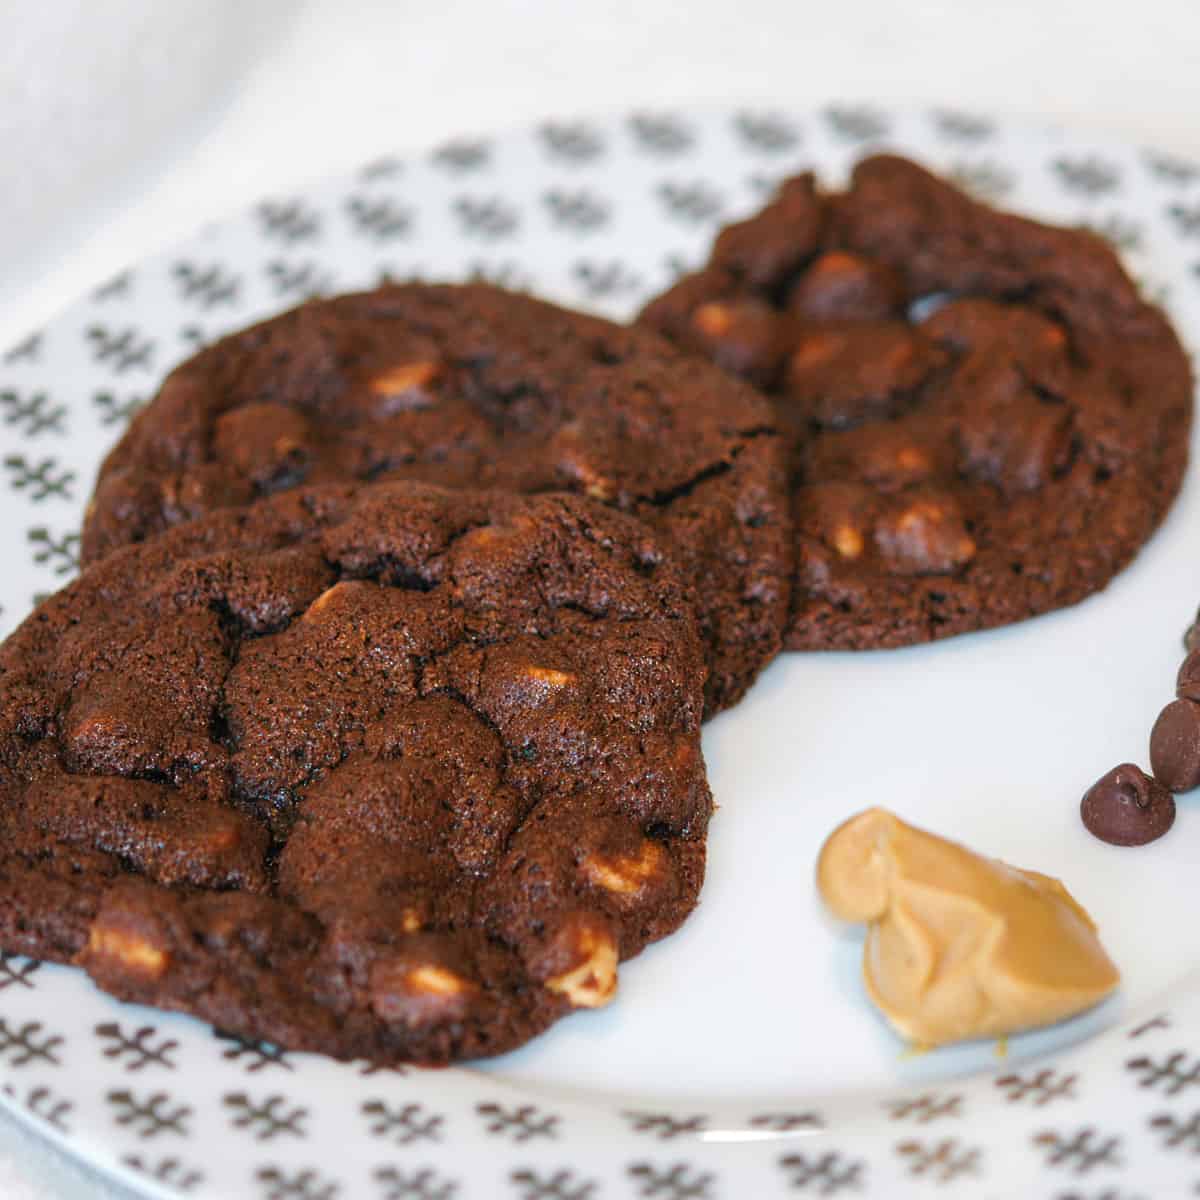 Chocolate Peanut Butter Chip cookies on a white plate with a scoop of peanut butter and a few chocolate chips.